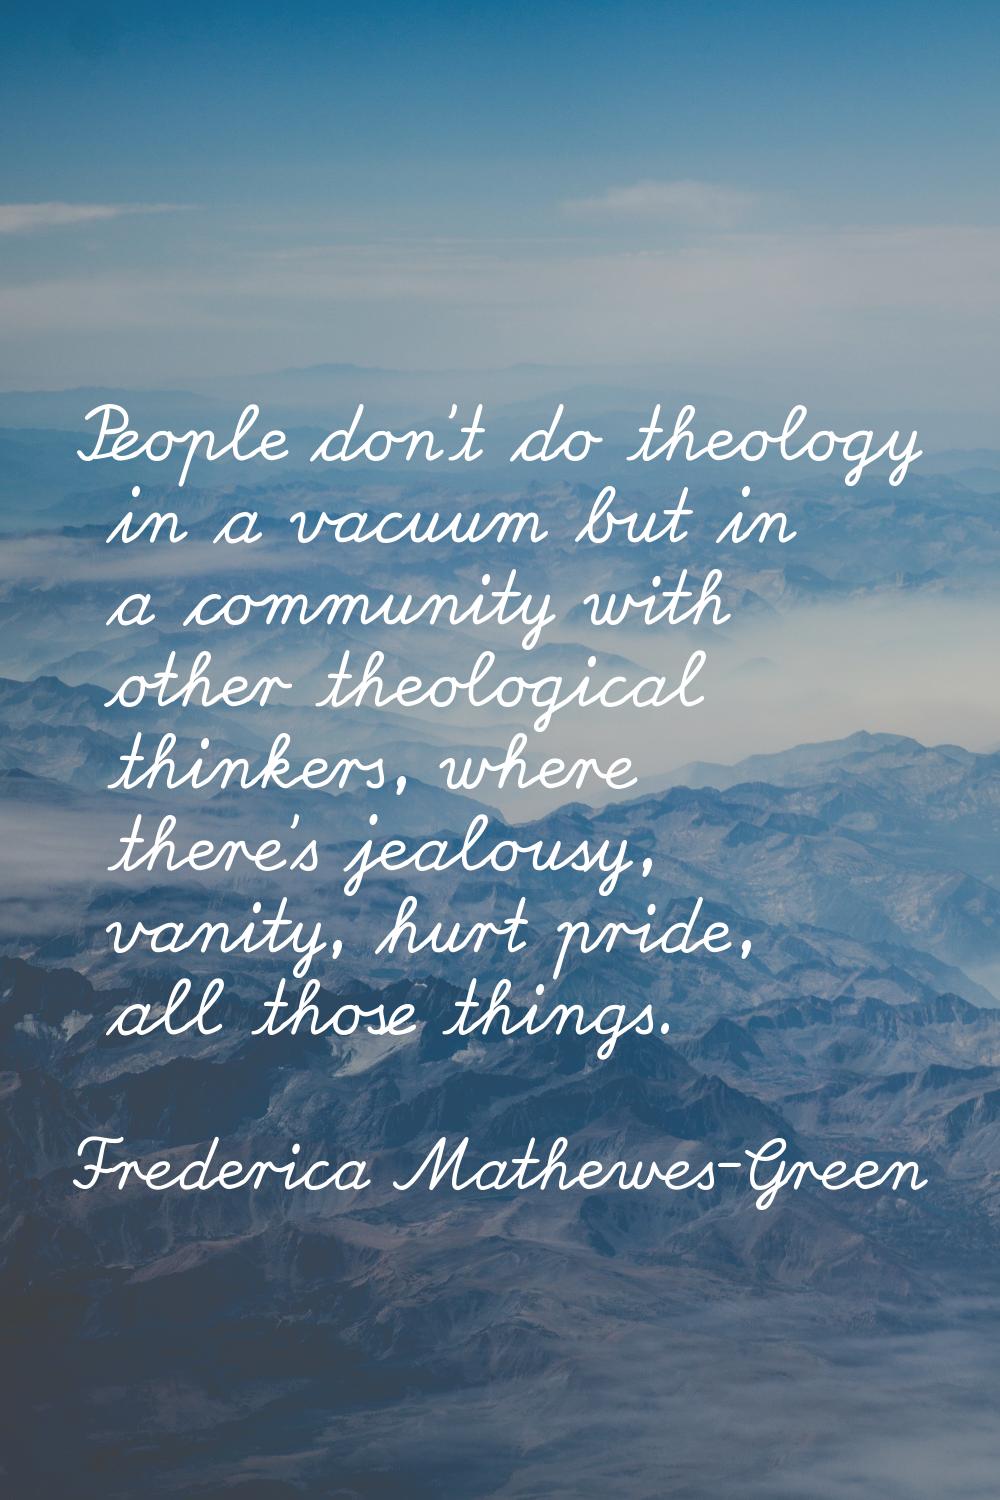 People don't do theology in a vacuum but in a community with other theological thinkers, where ther